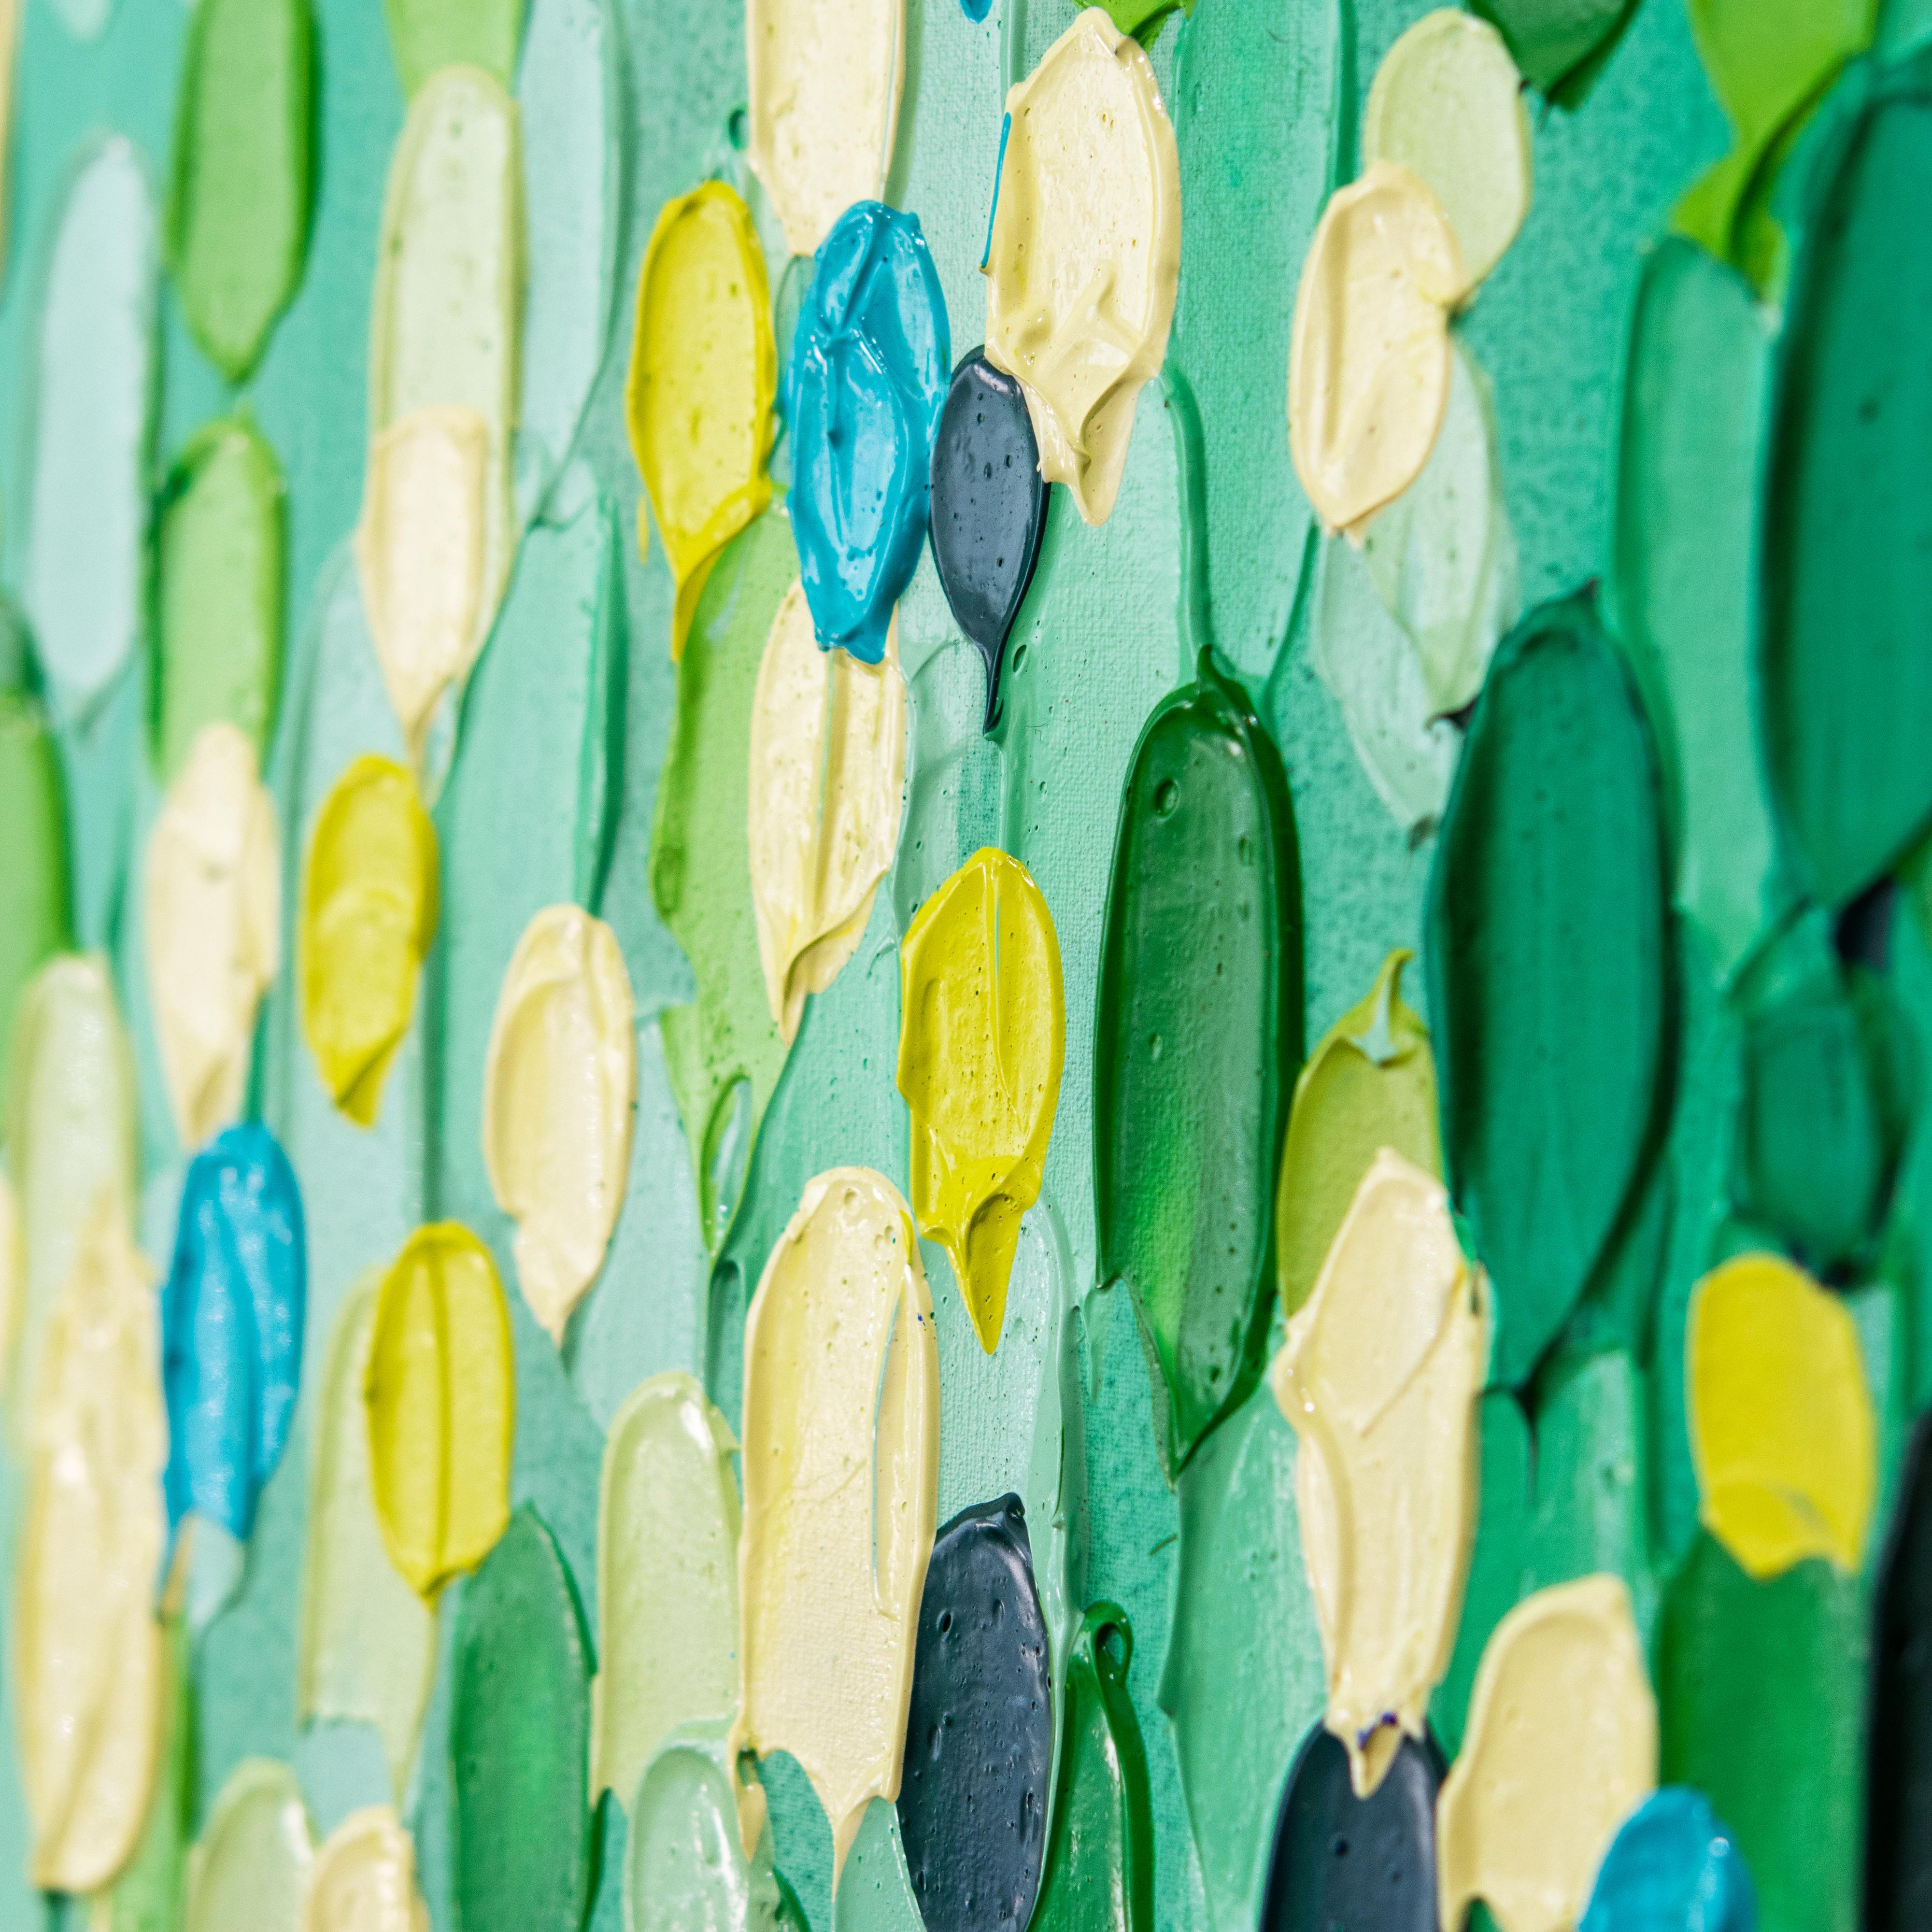 ‘Color Map IV' Wrapped Canvas Original Painting features a playful abstract aesthetic in tones of green, yellow, blue, buttercream, and gray. Inspired by the beauty surrounding her in tropical Florida, Sarah LaPierre utilizes her profoundly distinct